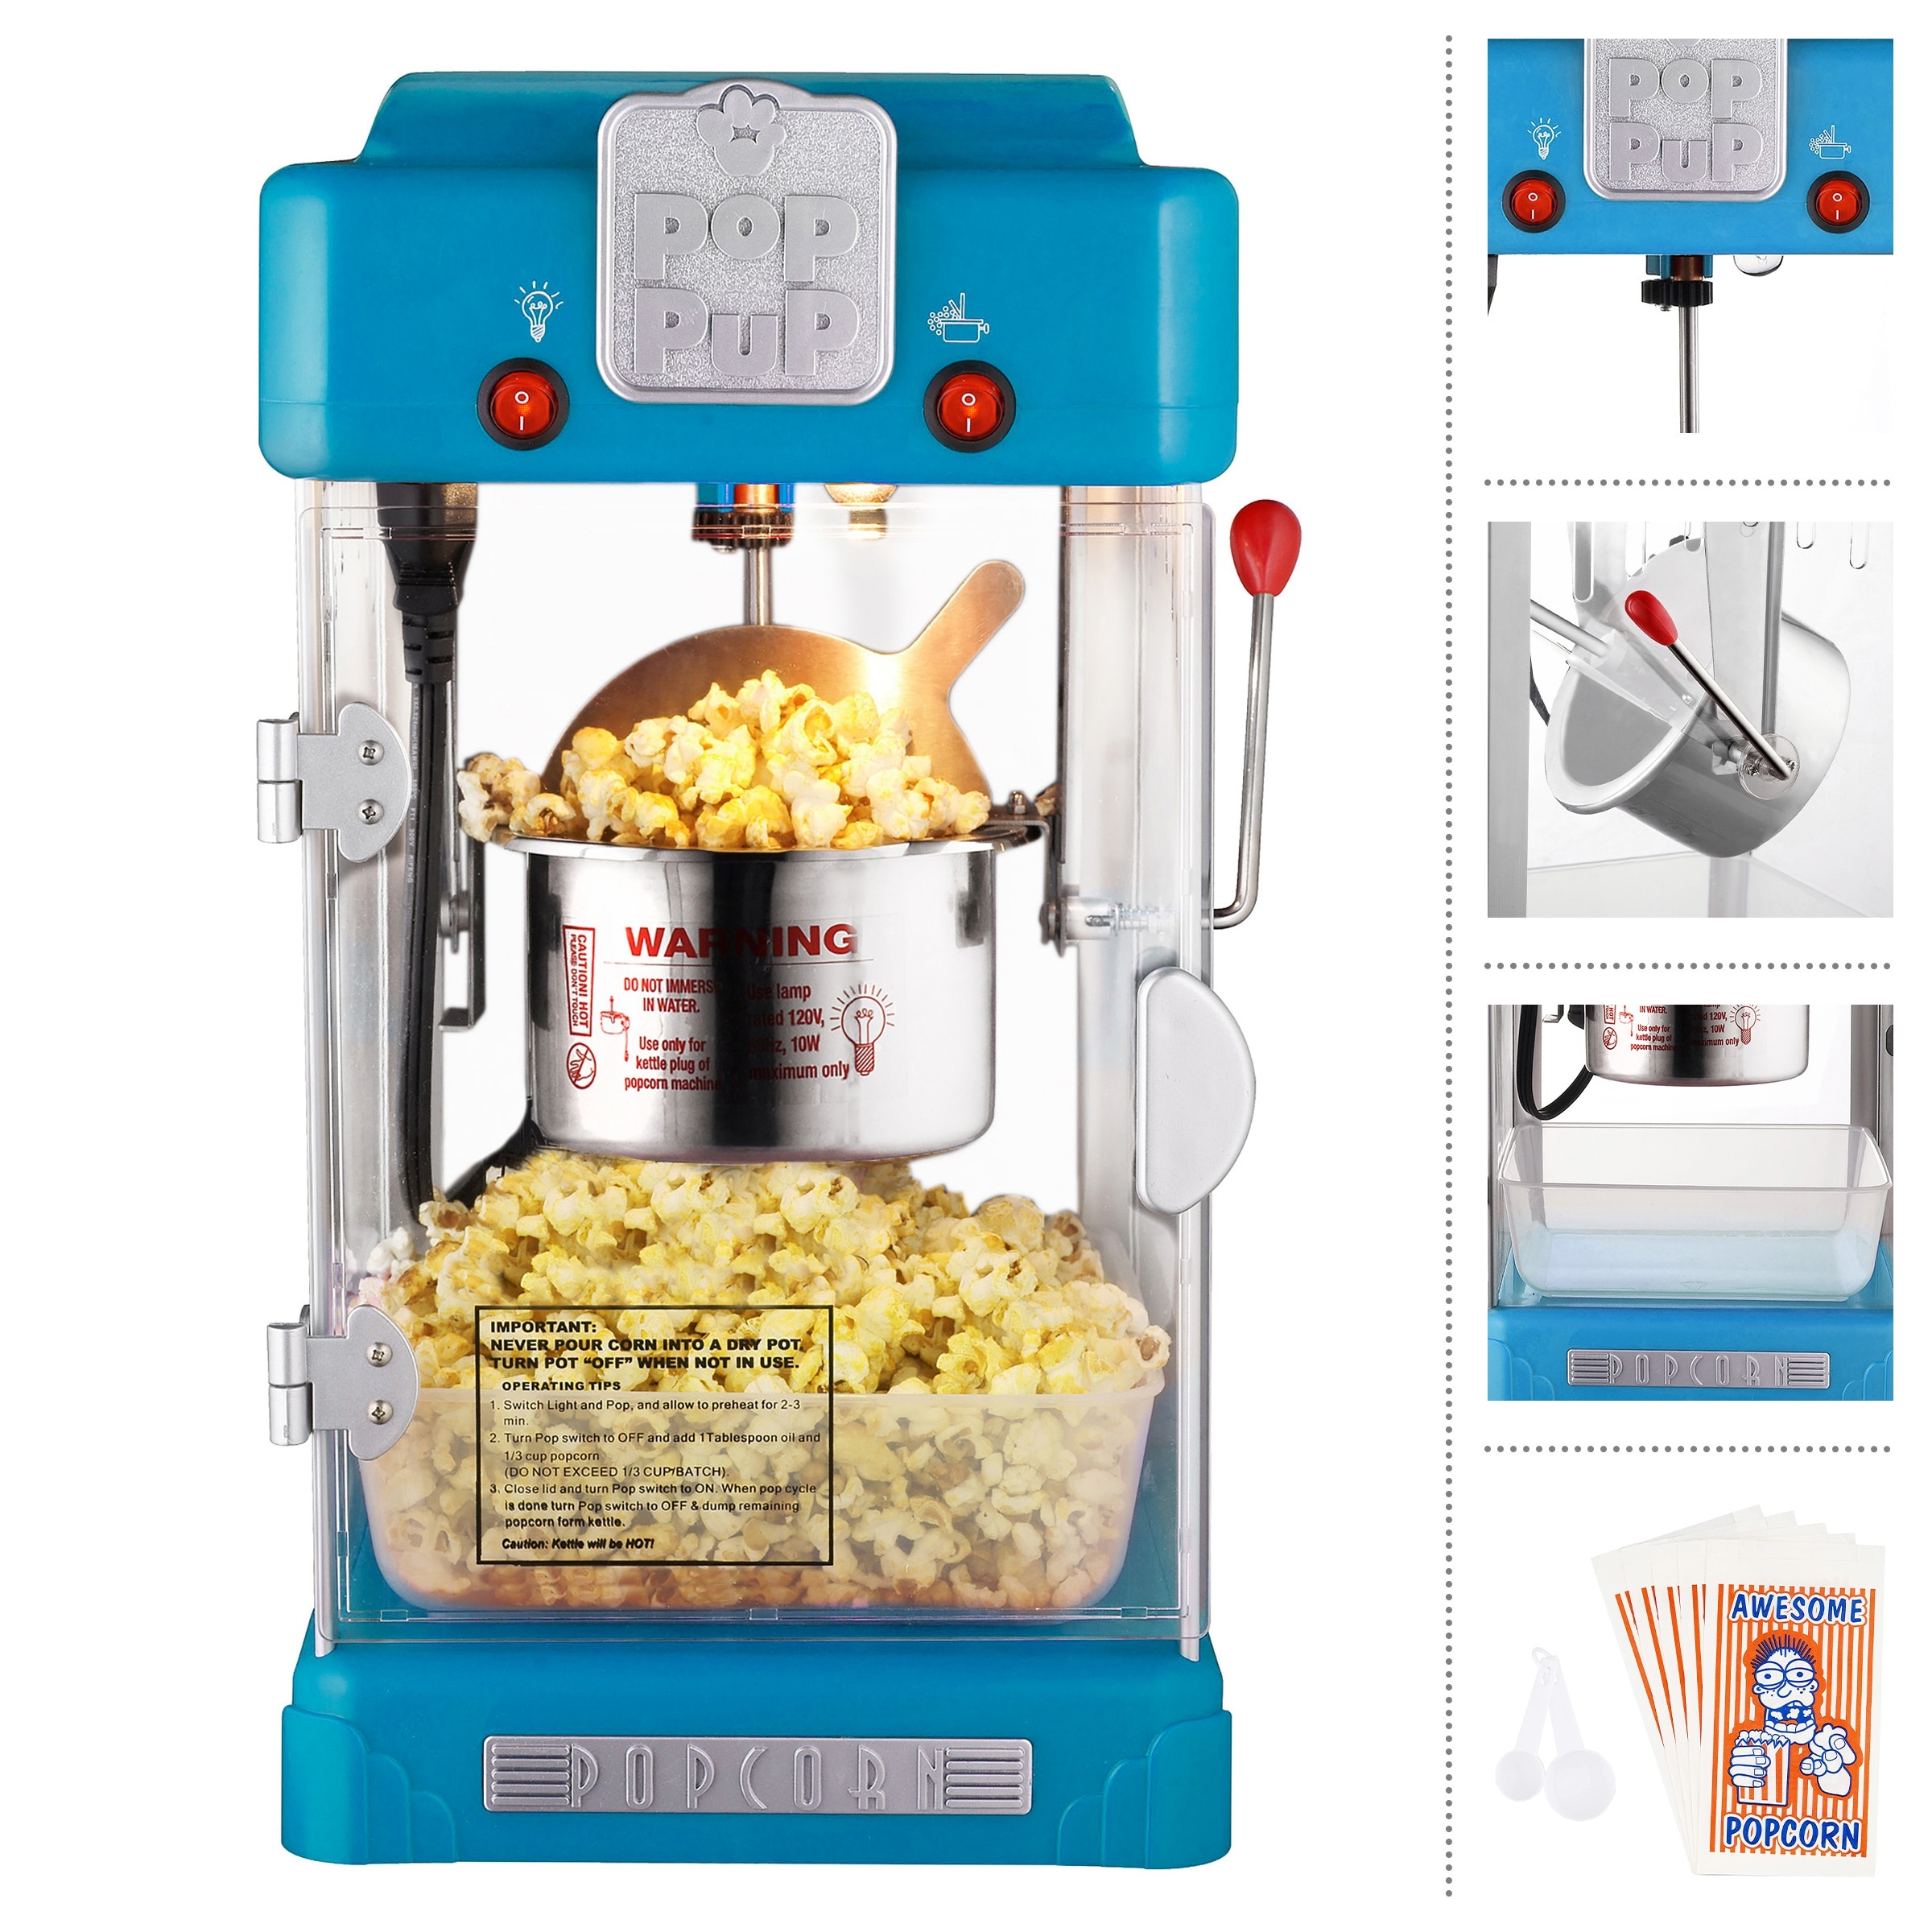 Great Northern Little Bambino 2.5 oz. Kettle Blue Countertop Popcorn Machine with Measuring Spoon, Scoop, and 25 Serving Bags